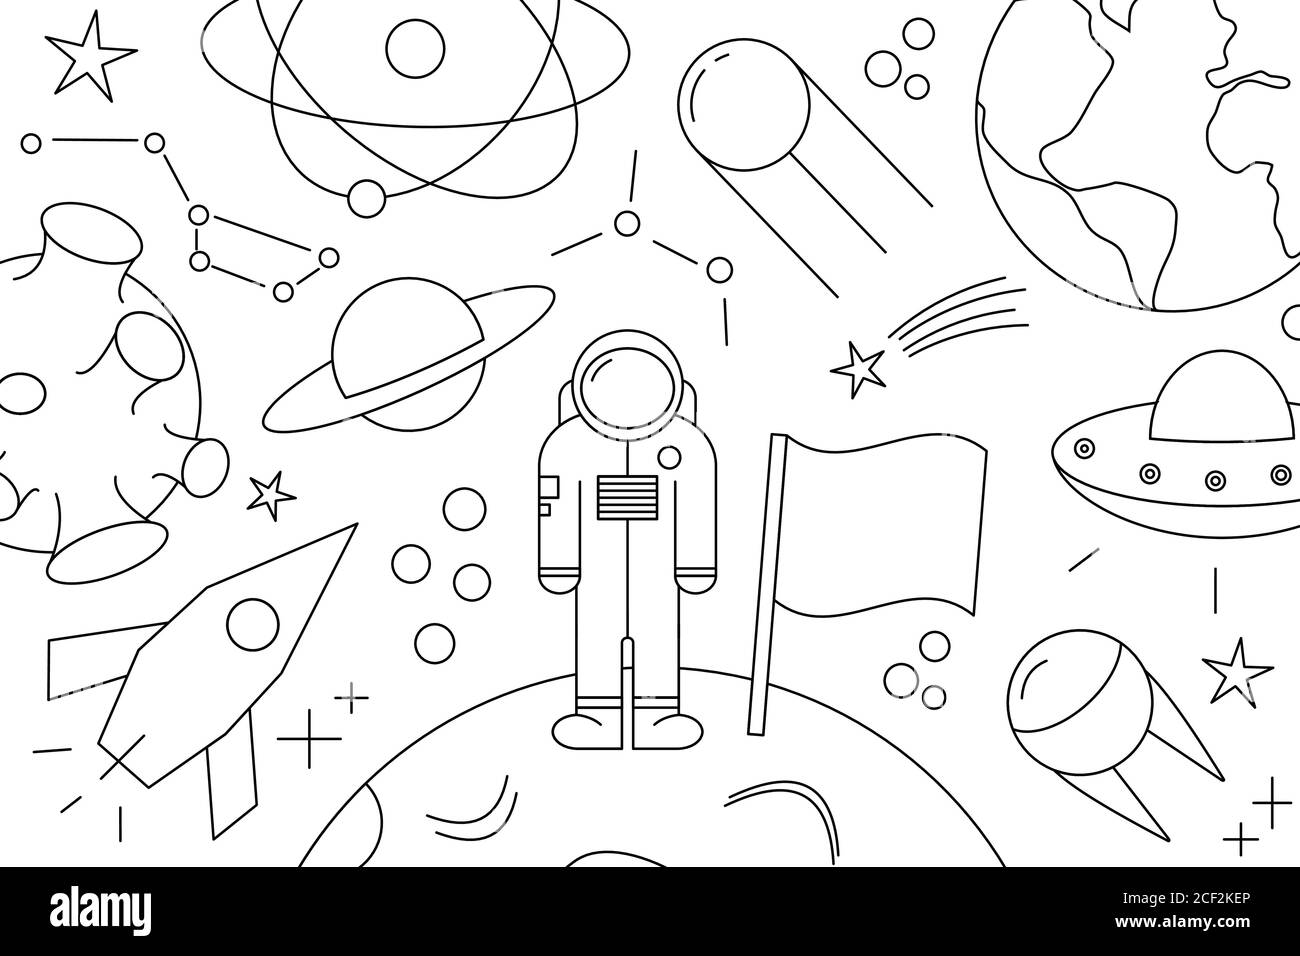 Modern pattern of planet, star, comet, with different rockets. Universe line drawings. Cosmos. Trendy space signs, constellation, moon. Outline Stock Vector